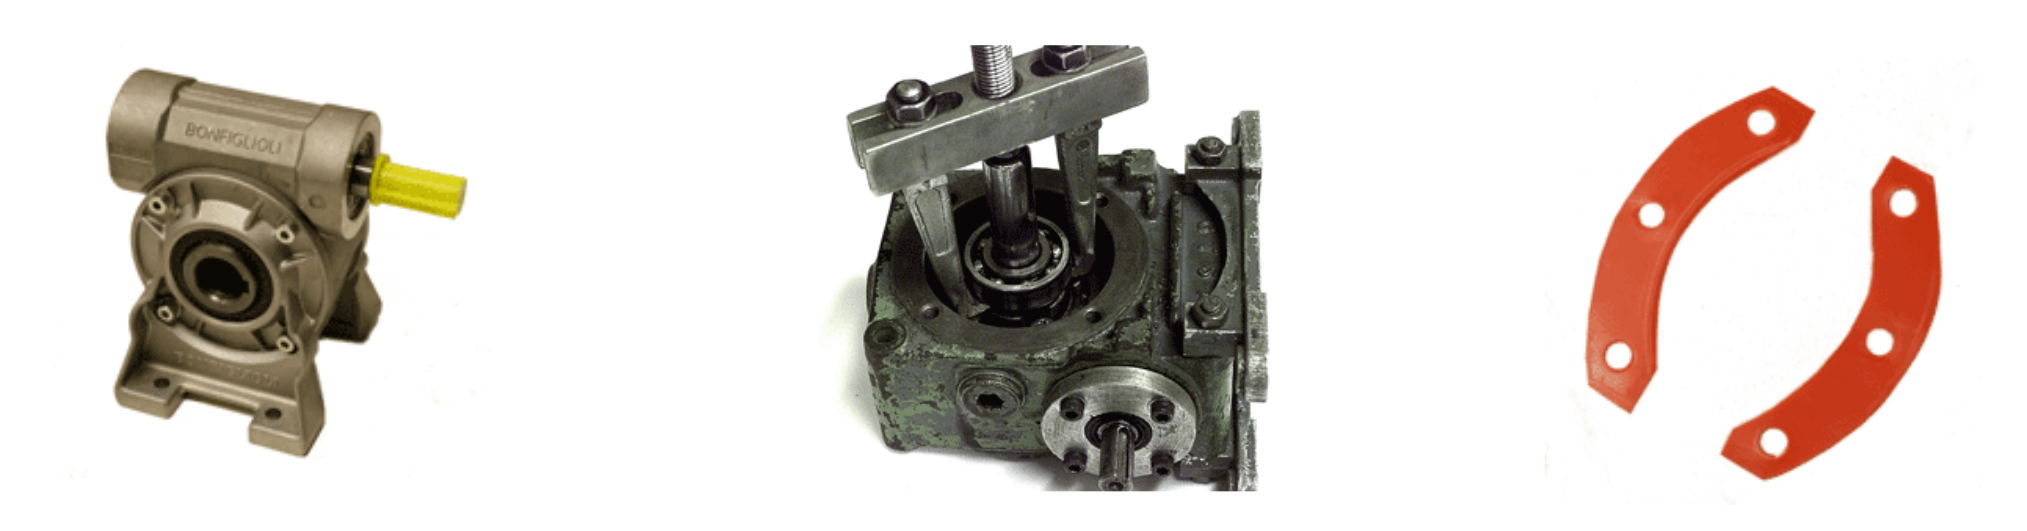 Gear box and bearing puller with gasket